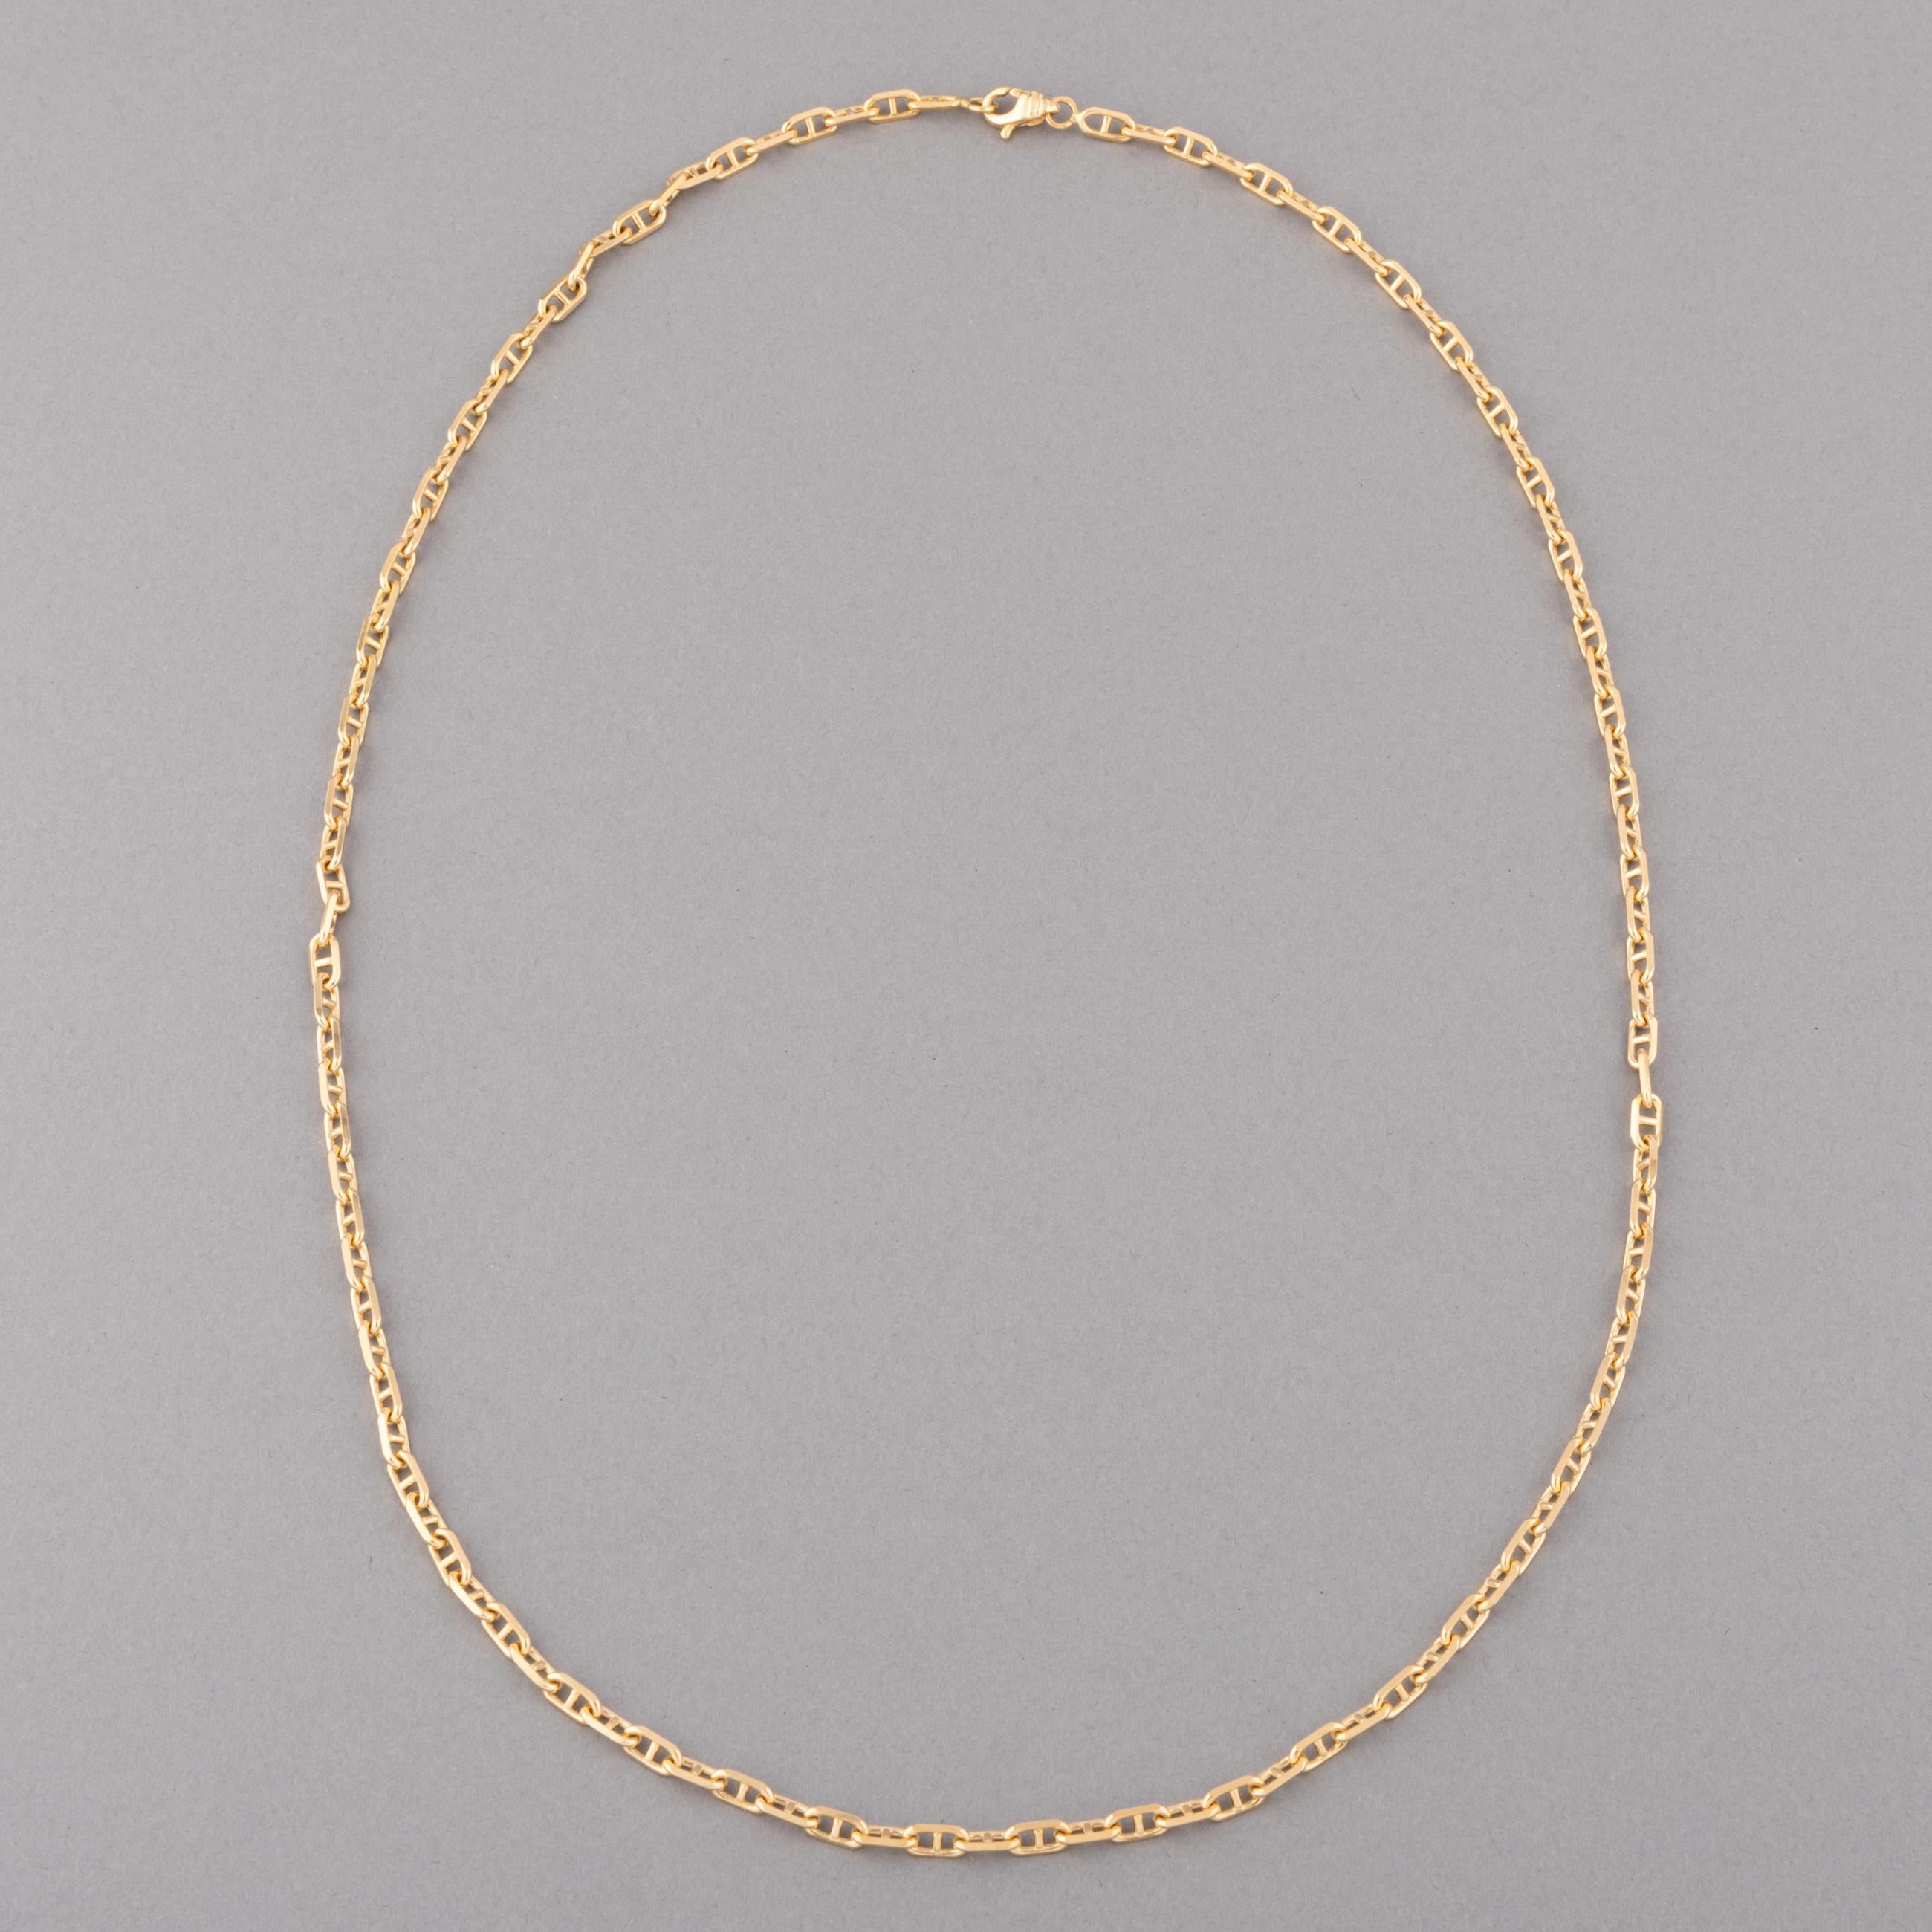 A lovely vintage chain, french made.
Navy mesh, 56 cm length. French hallmark for gold 18k: the eagle head.
3mm width for the chain.
Total weight: 18.40 grams